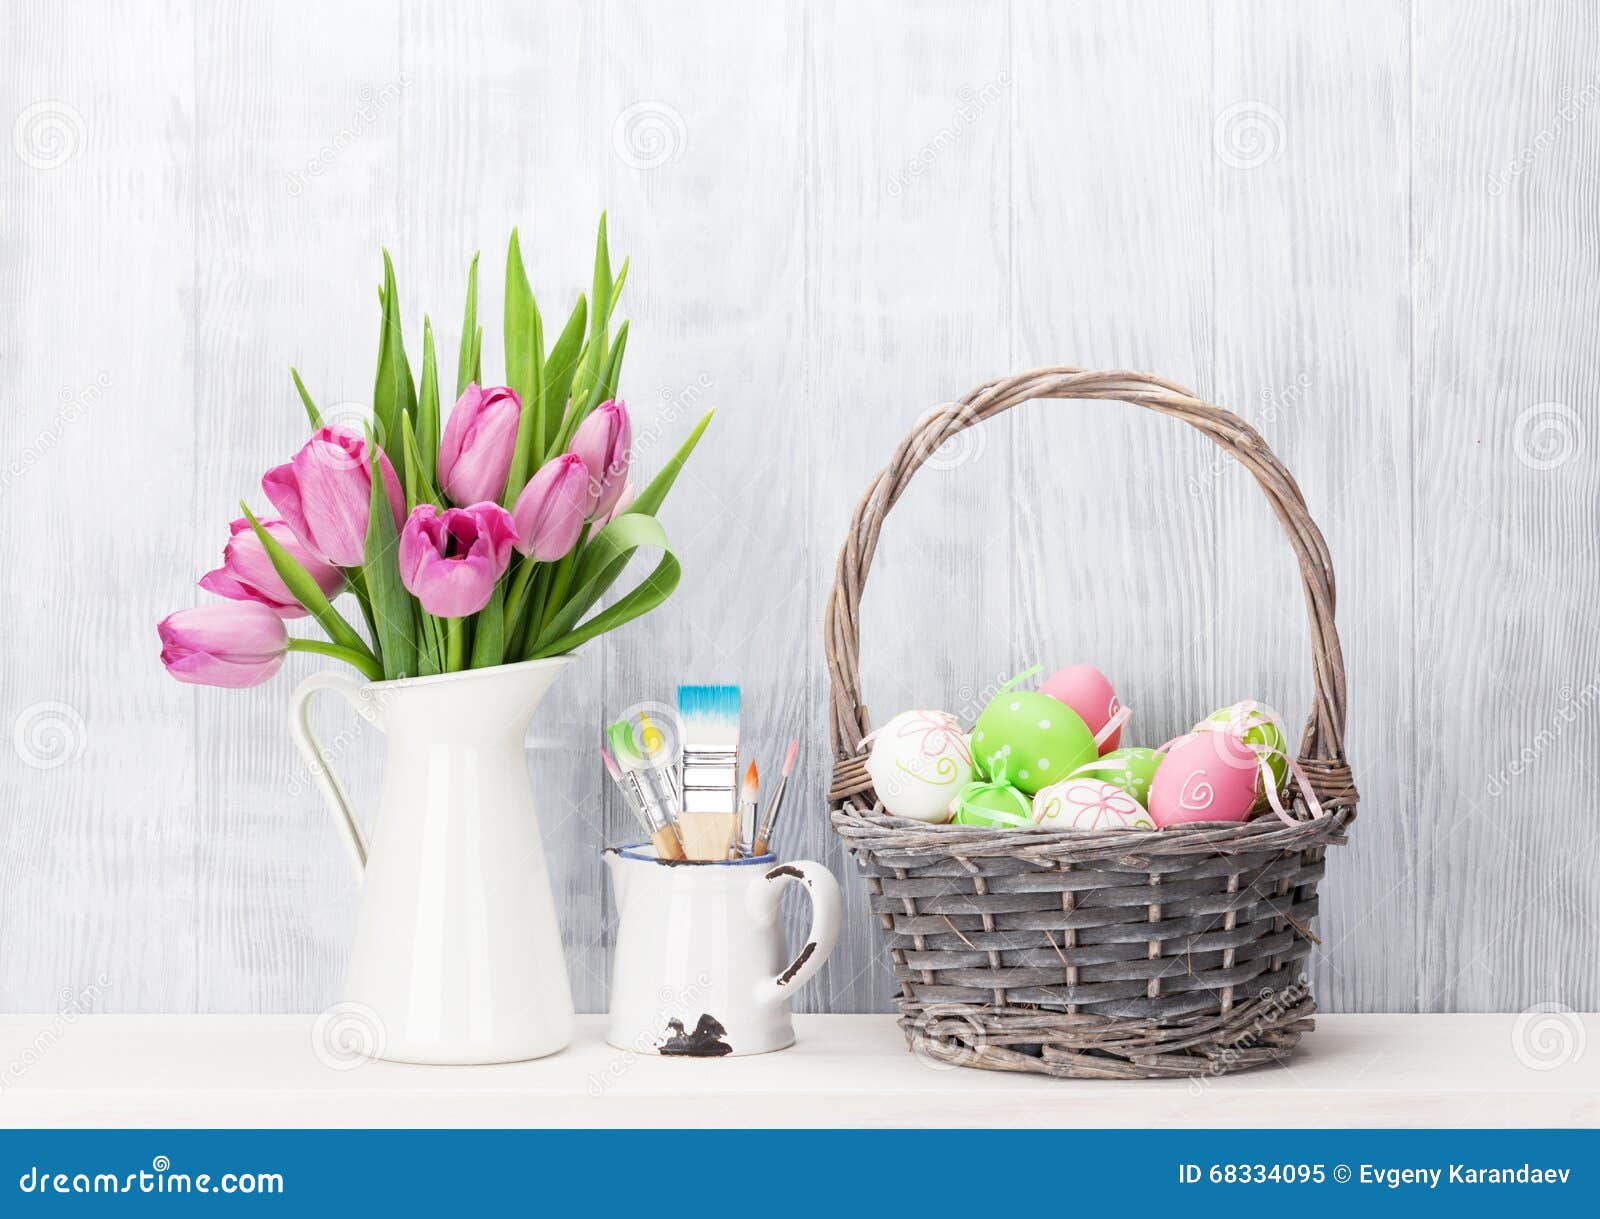 Easter Eggs and Pink Tulips Bouquet Stock Image - Image of natural ...